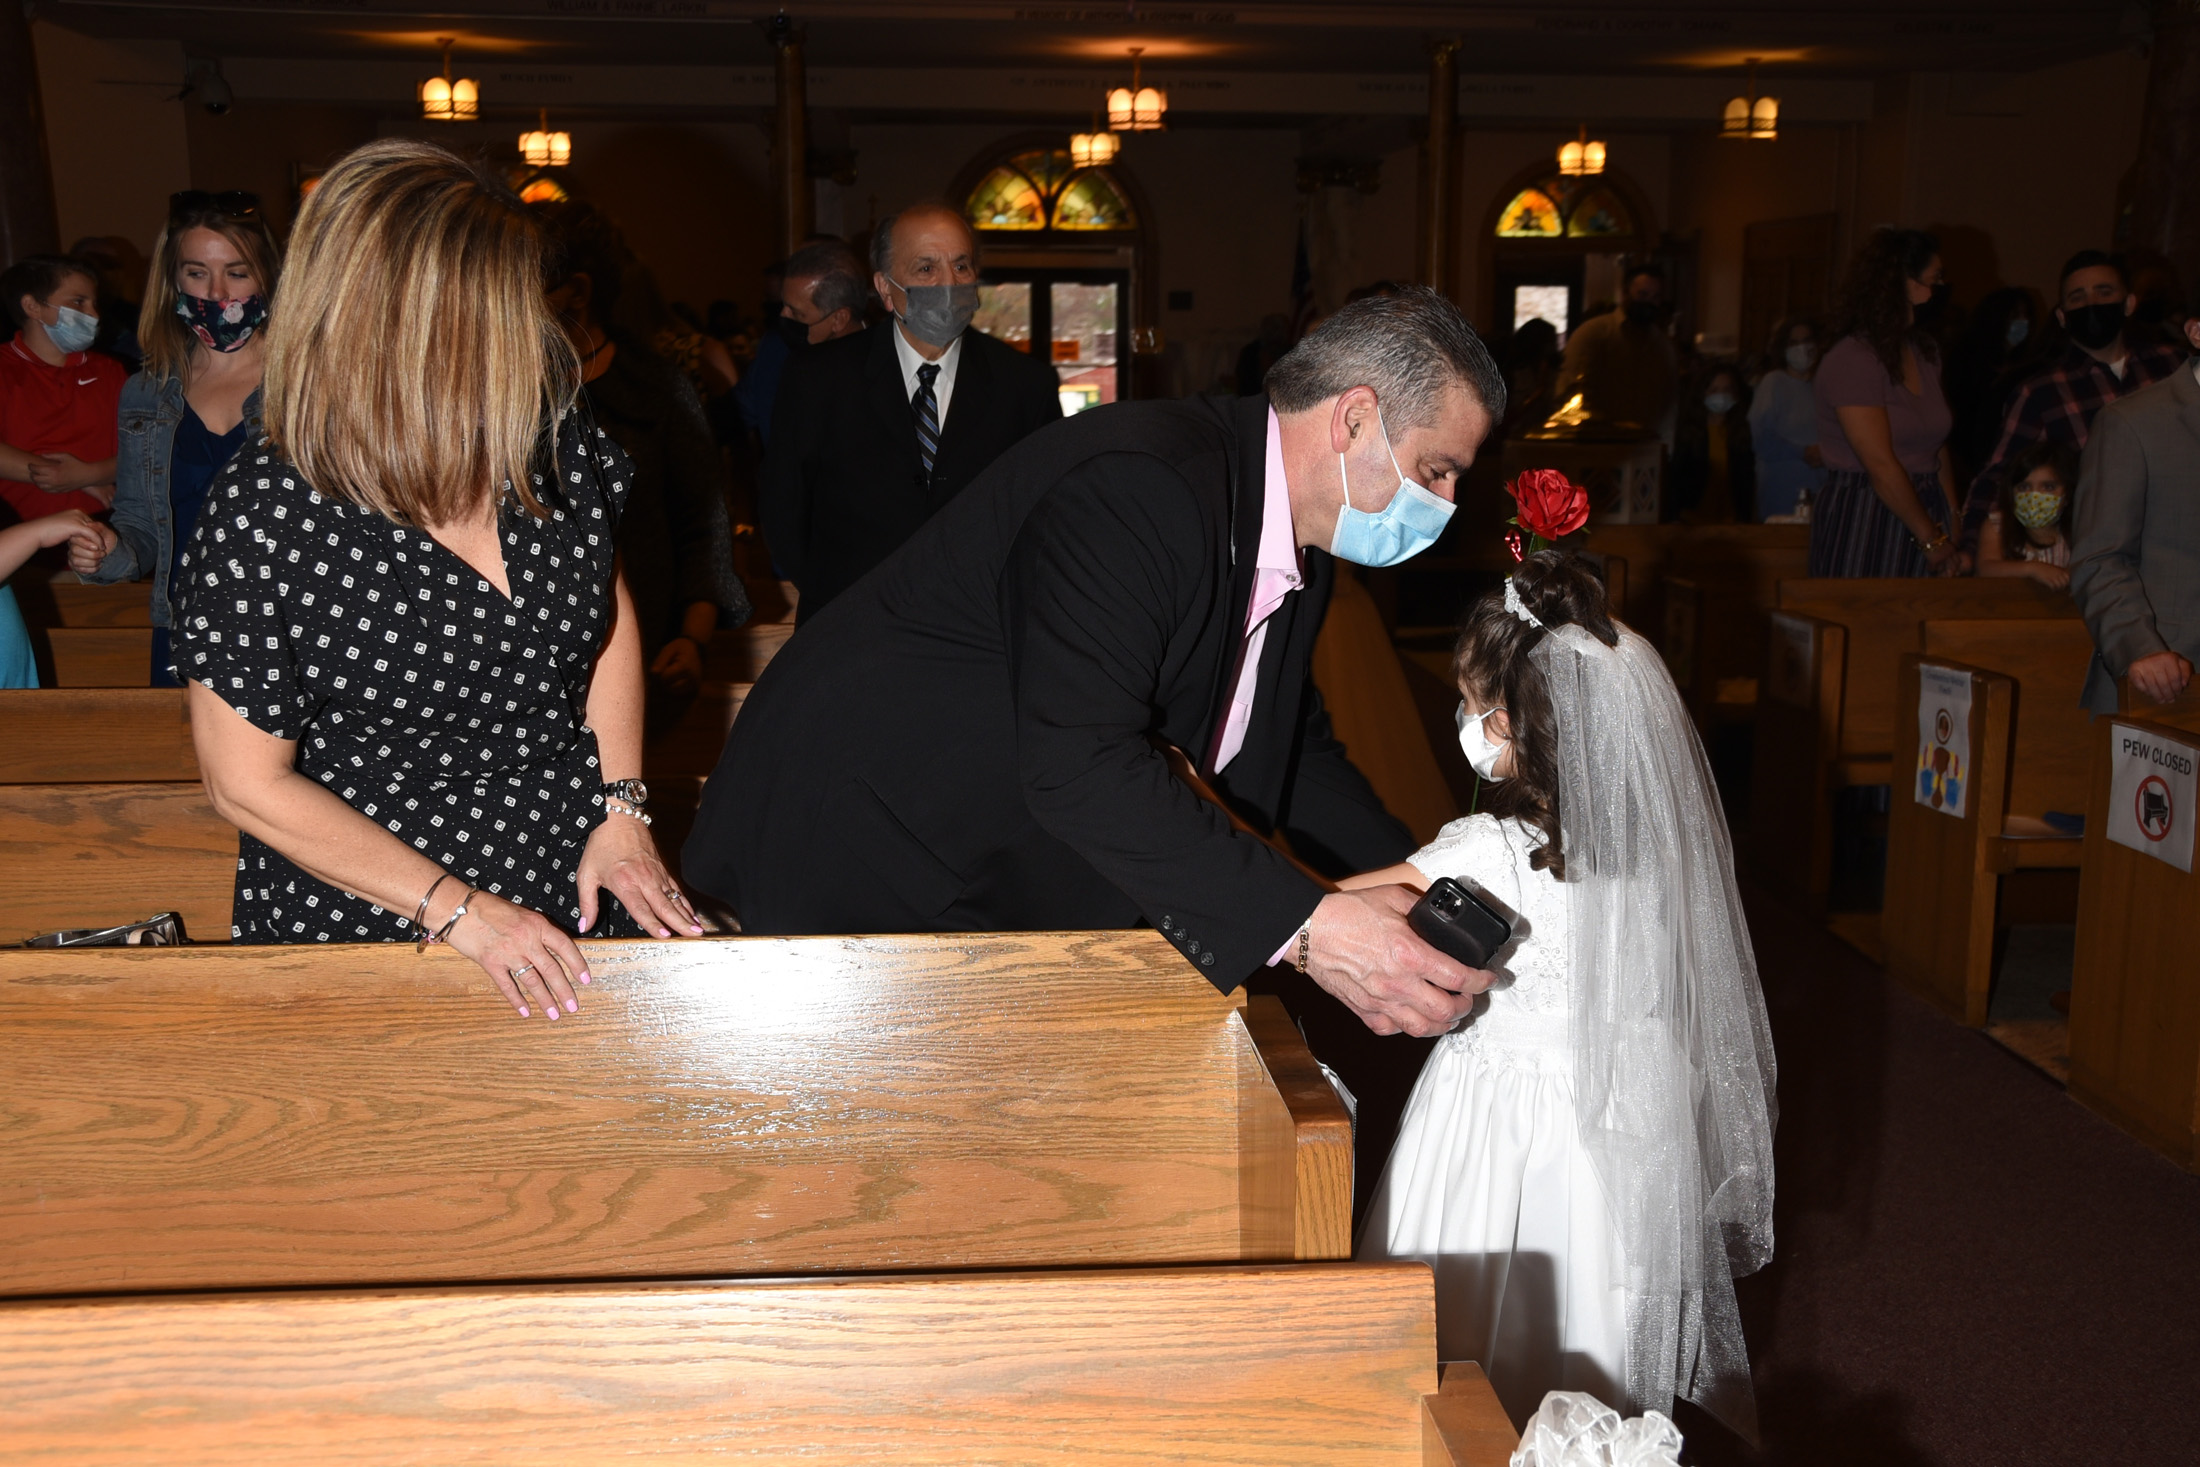 FIRST-COMMUNION-MAY-2-2021-1001001227